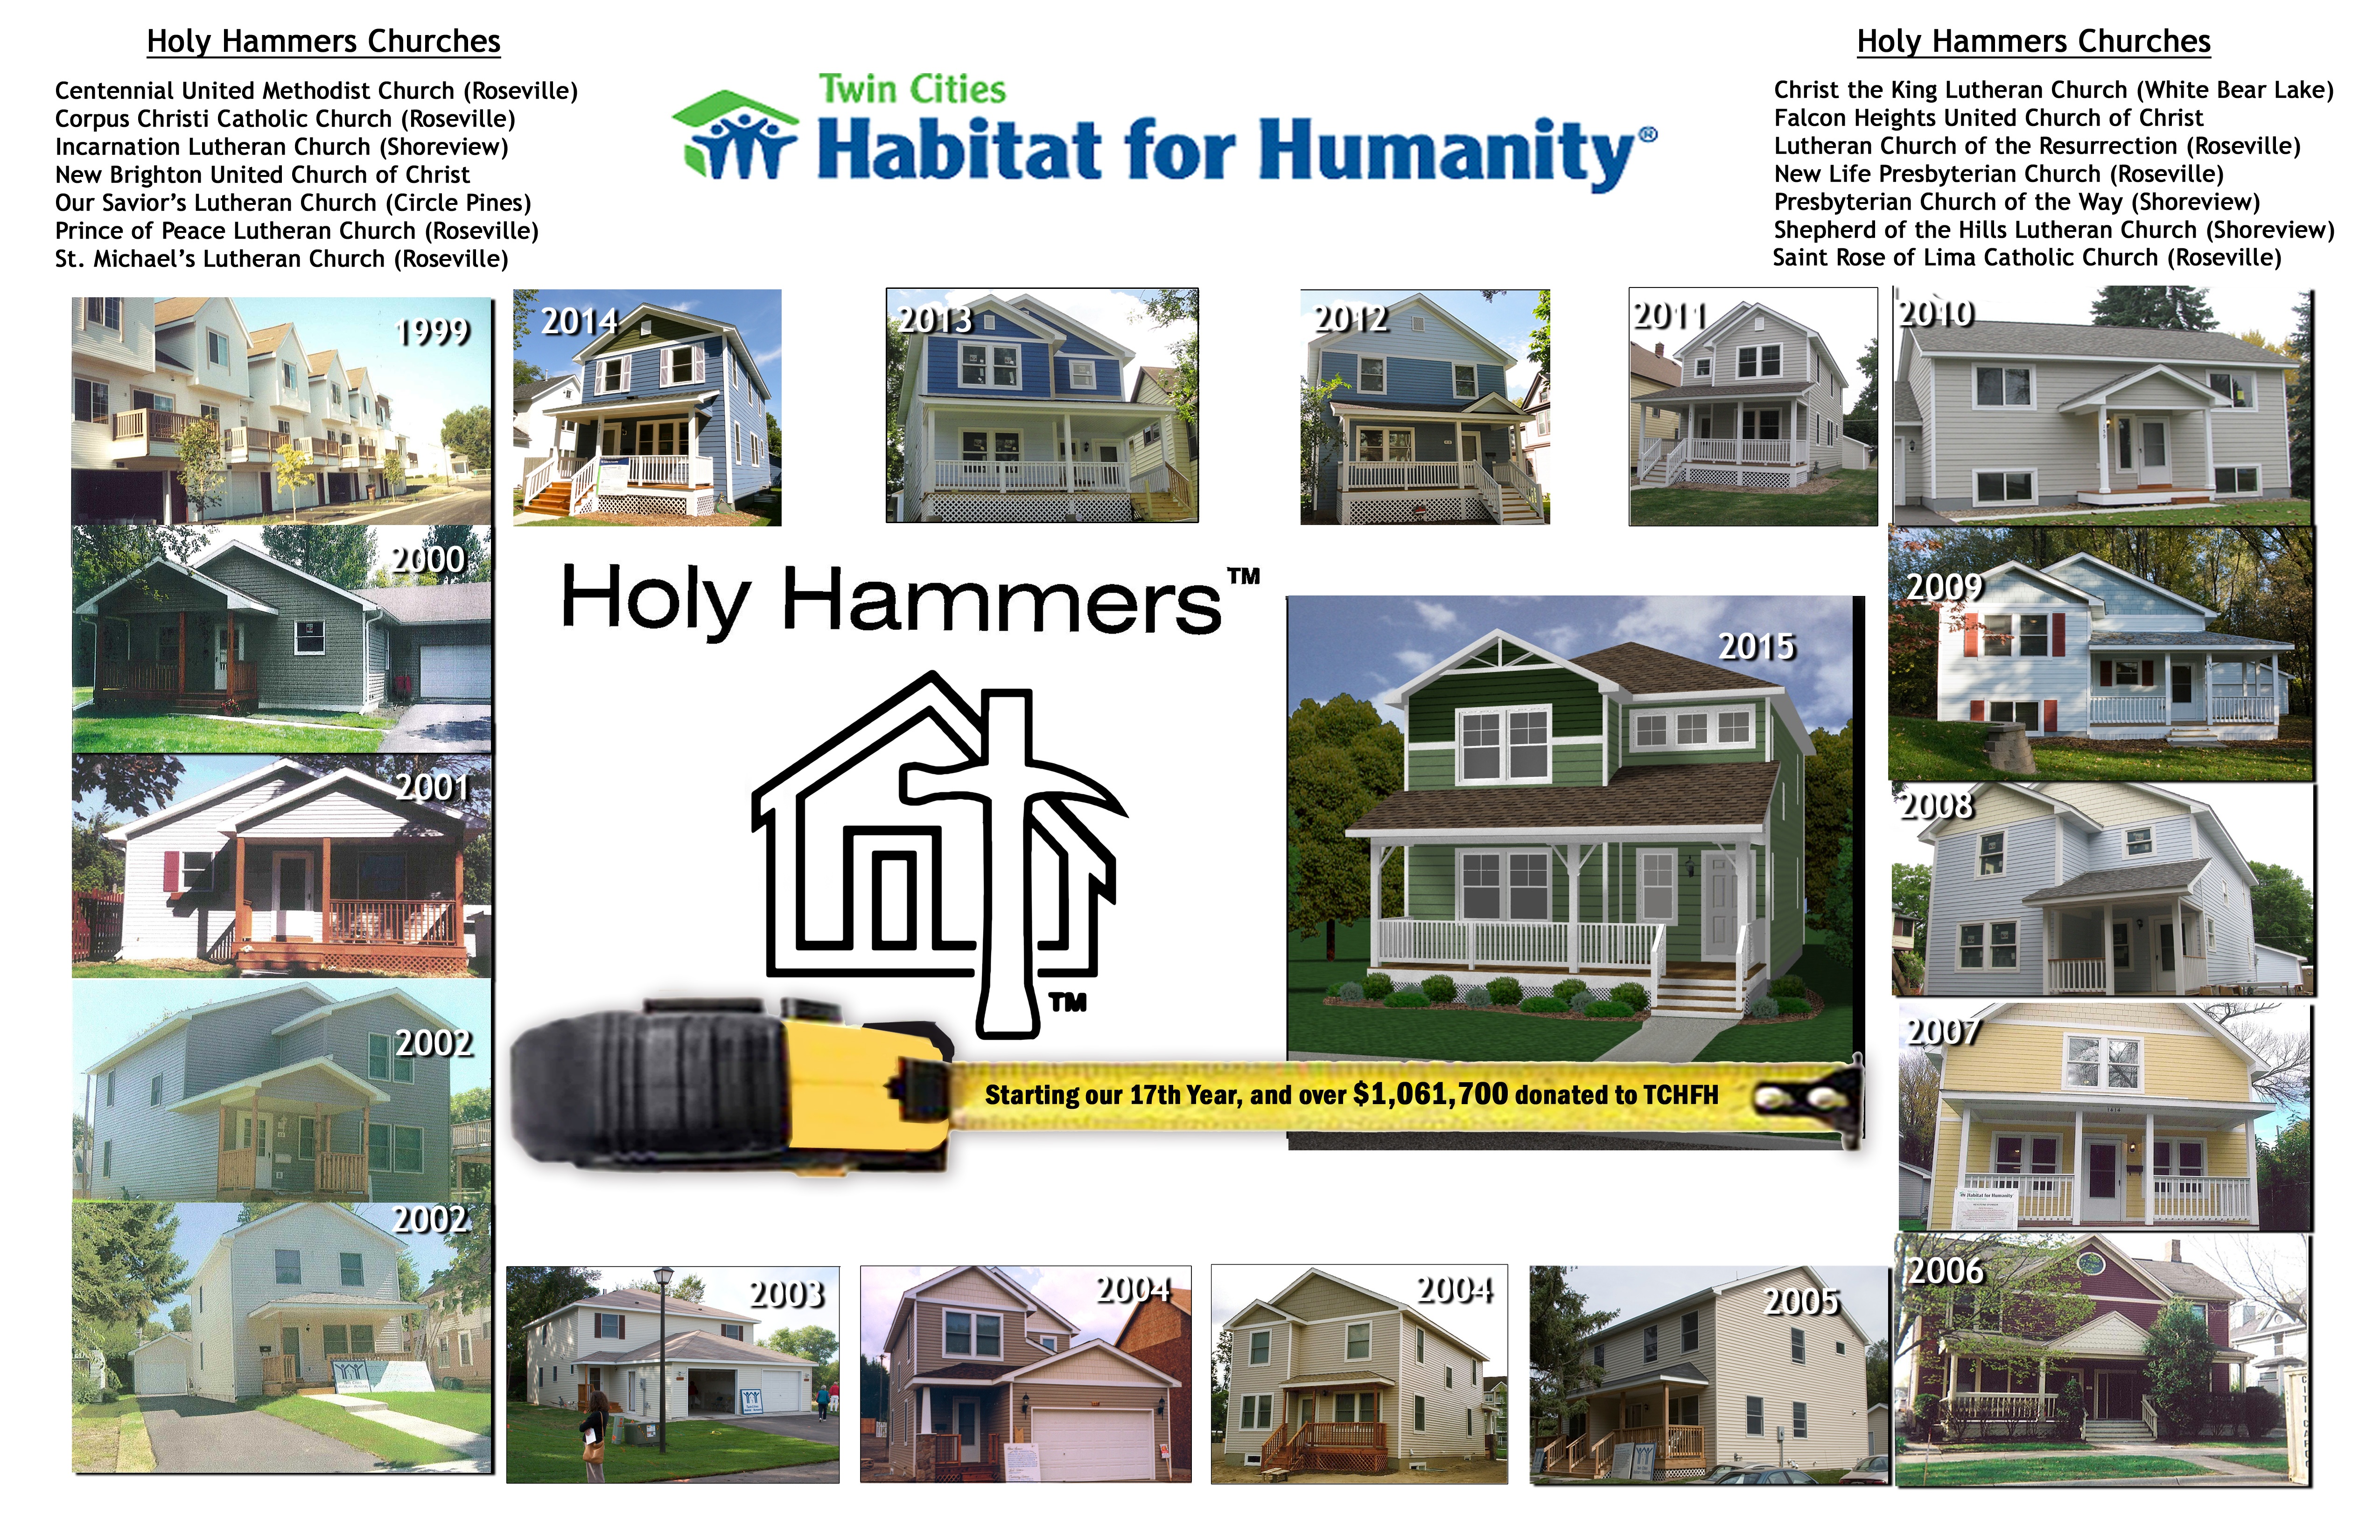 Holy Hammers builds 20th home with Habitat